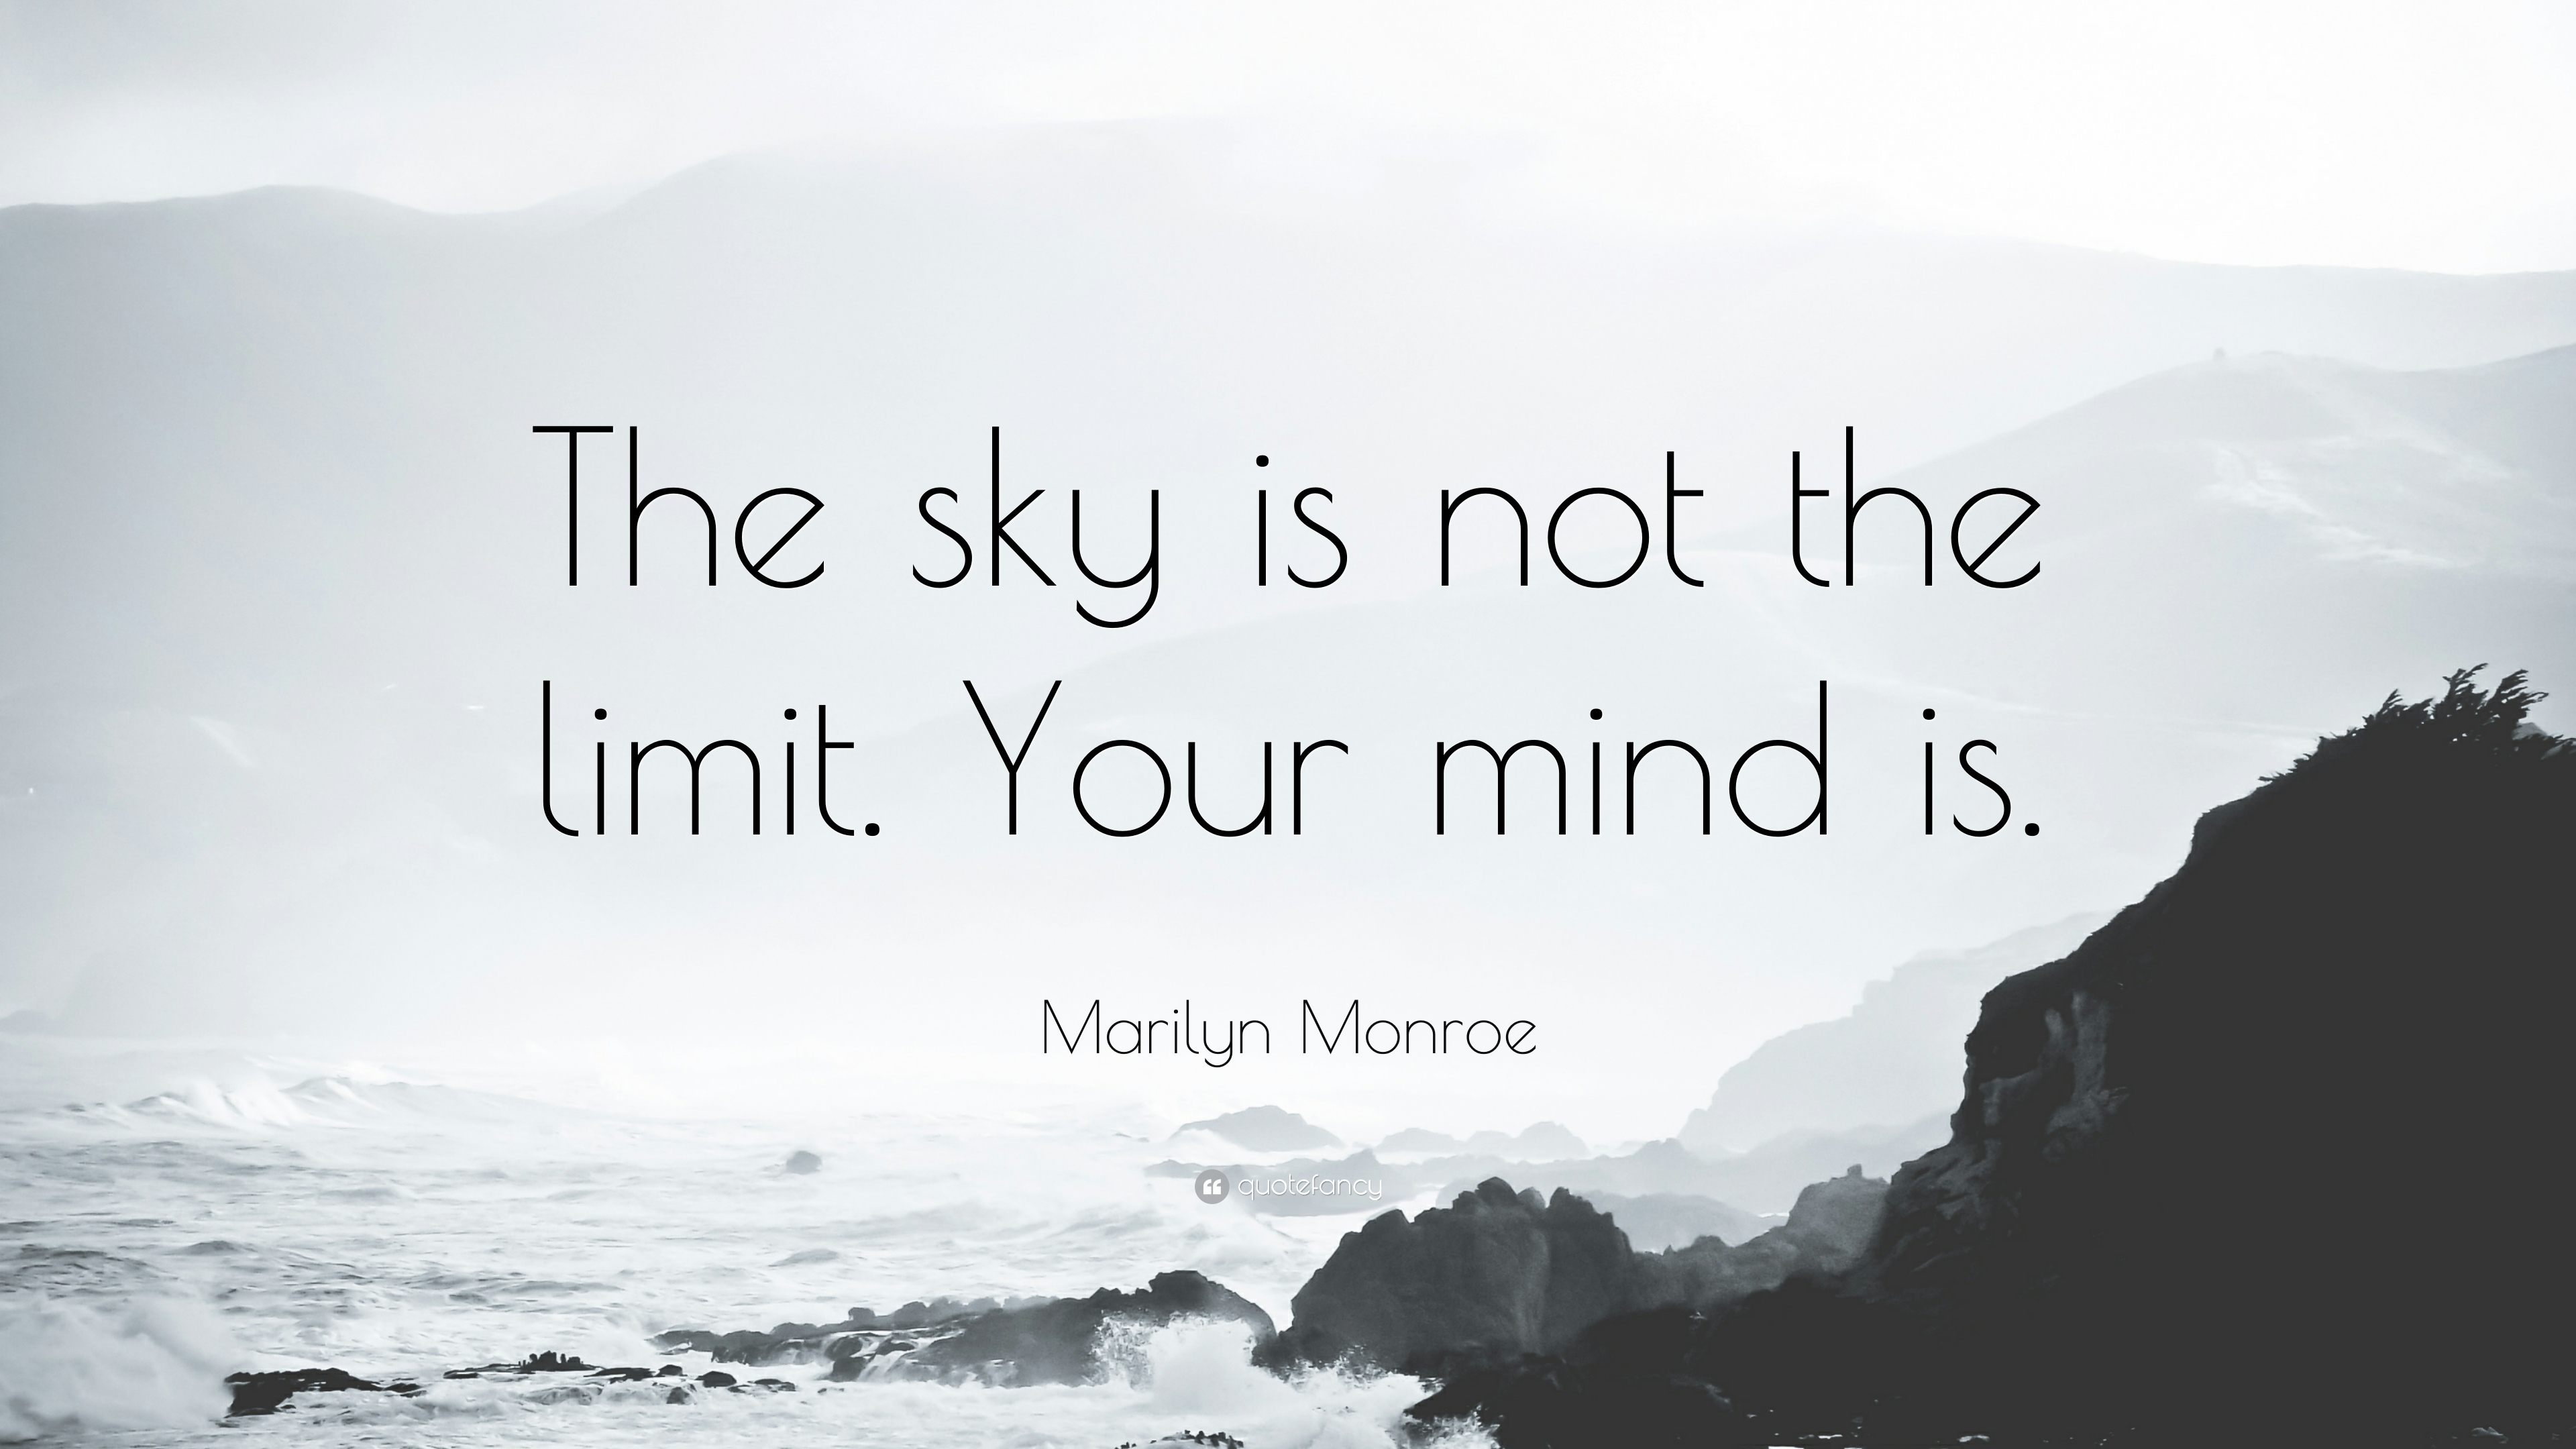 Marilyn Monroe Quote: “The sky is not the limit. Your mind is.” (12 ...